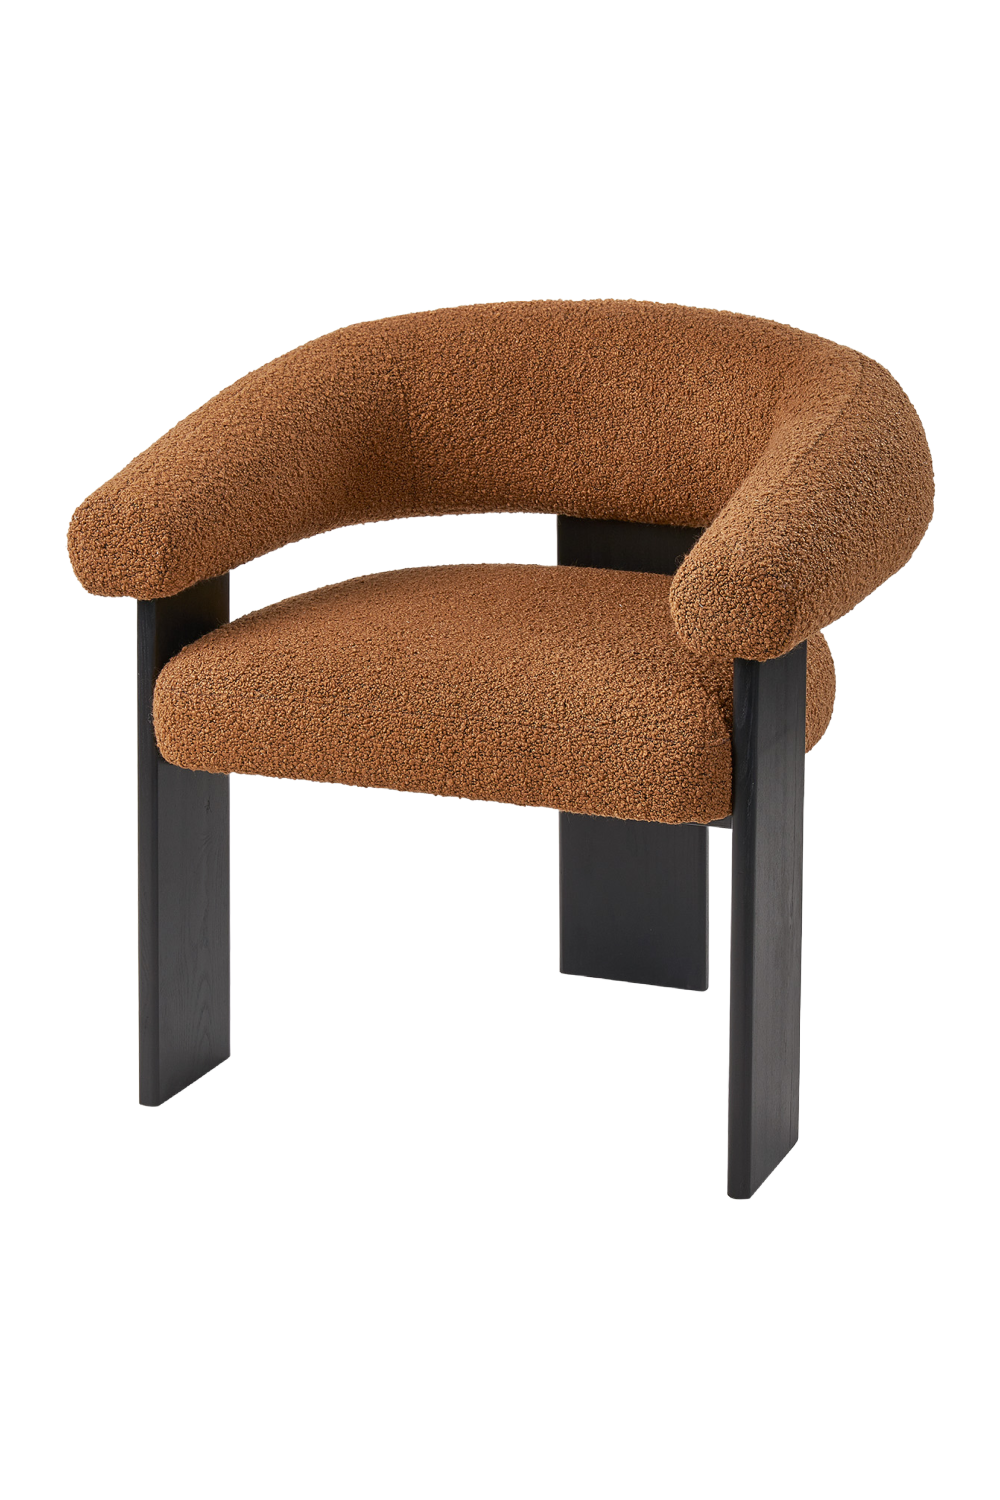 Curved Modern Occasional Chair | Liang & Eimil Kalo | Oroa.com